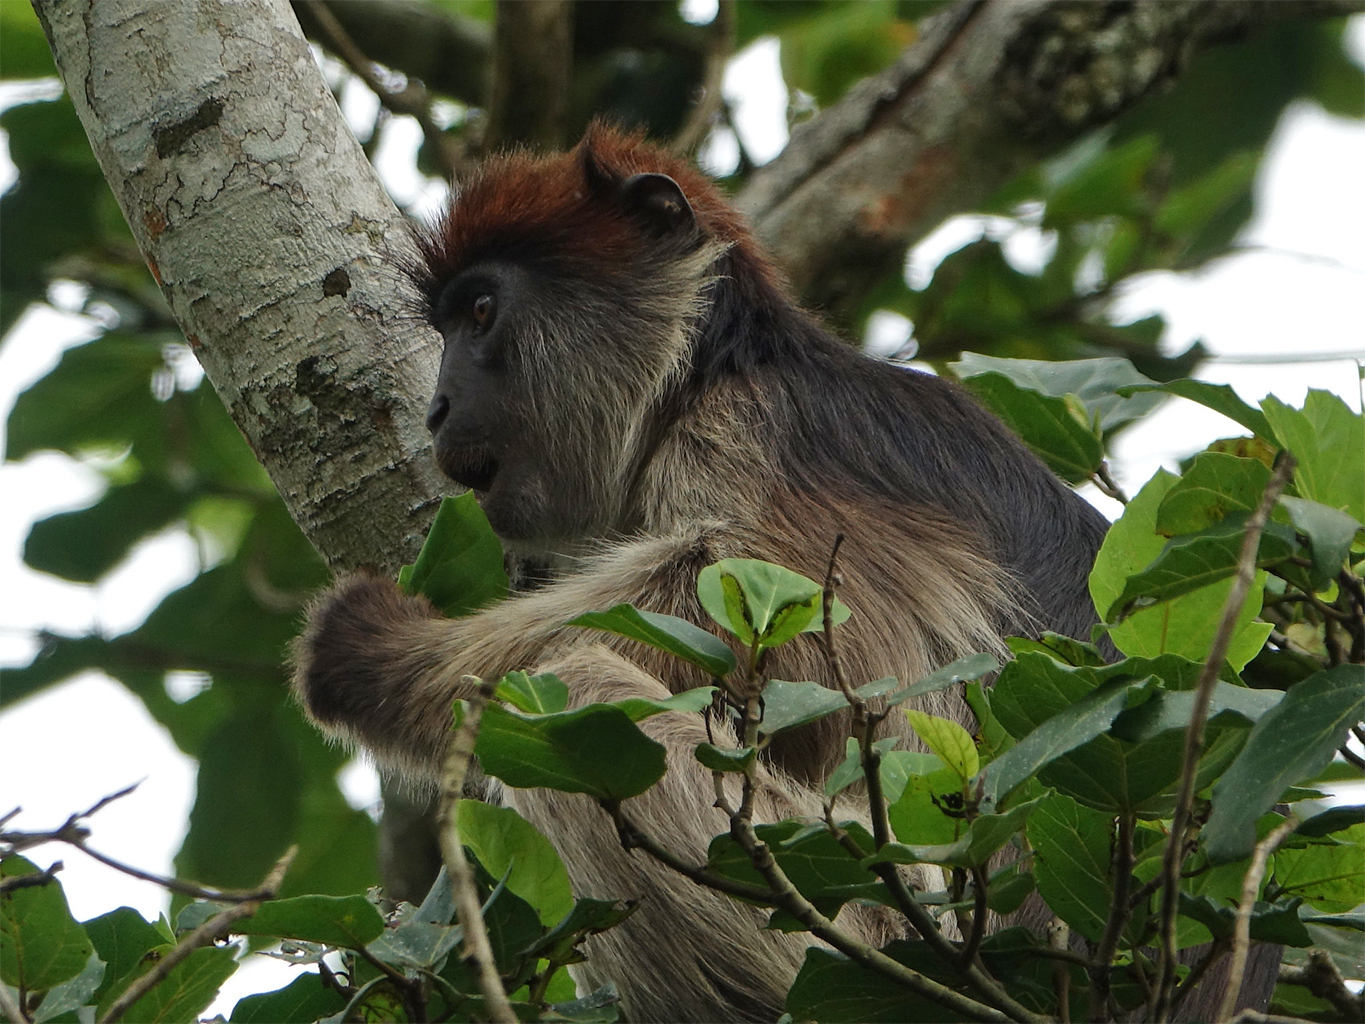 An ashy red colobus monkey